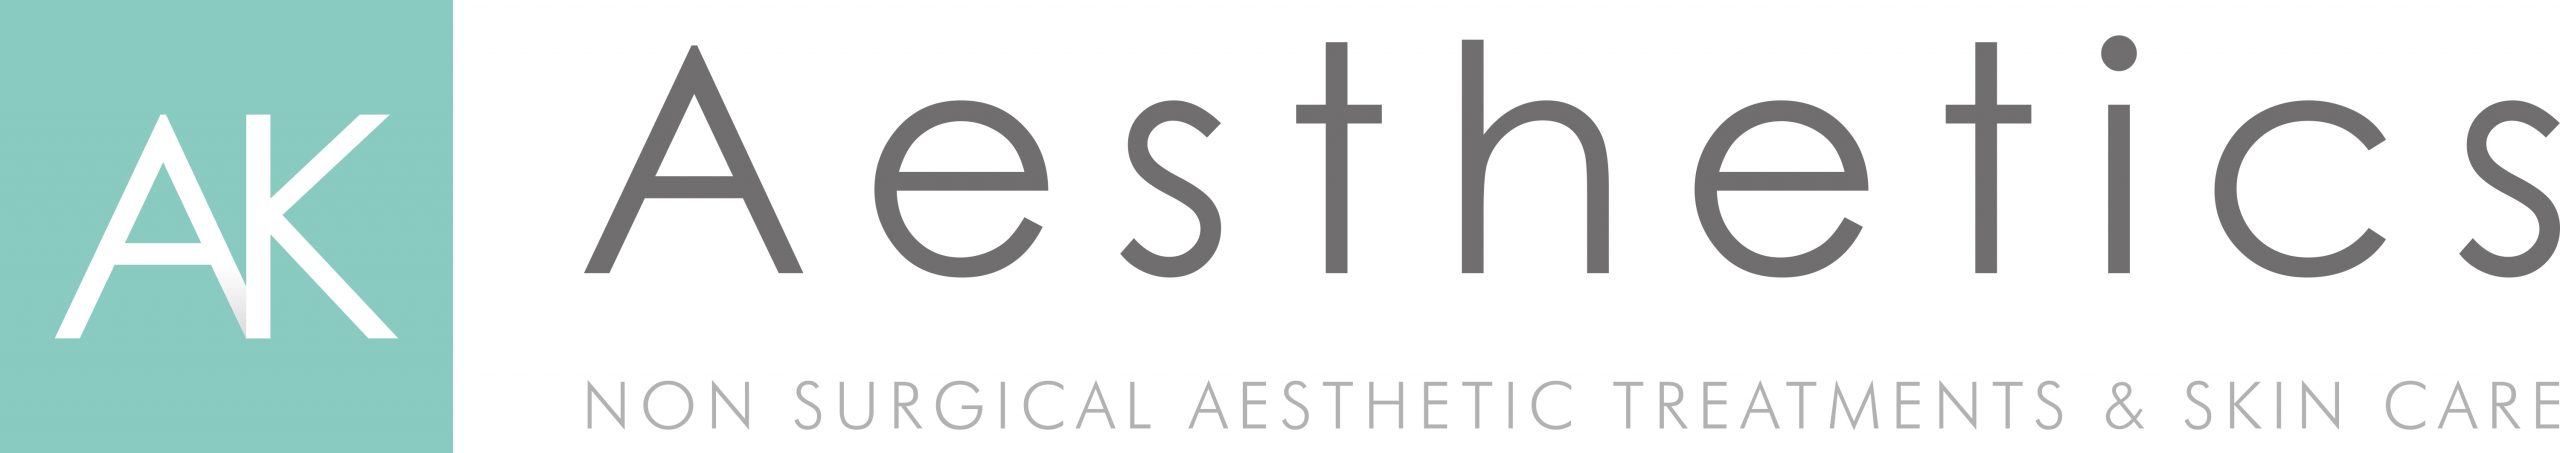 AK Aesthetics | High Wycombe | Non-surgical aesthetic & skincare treatments.